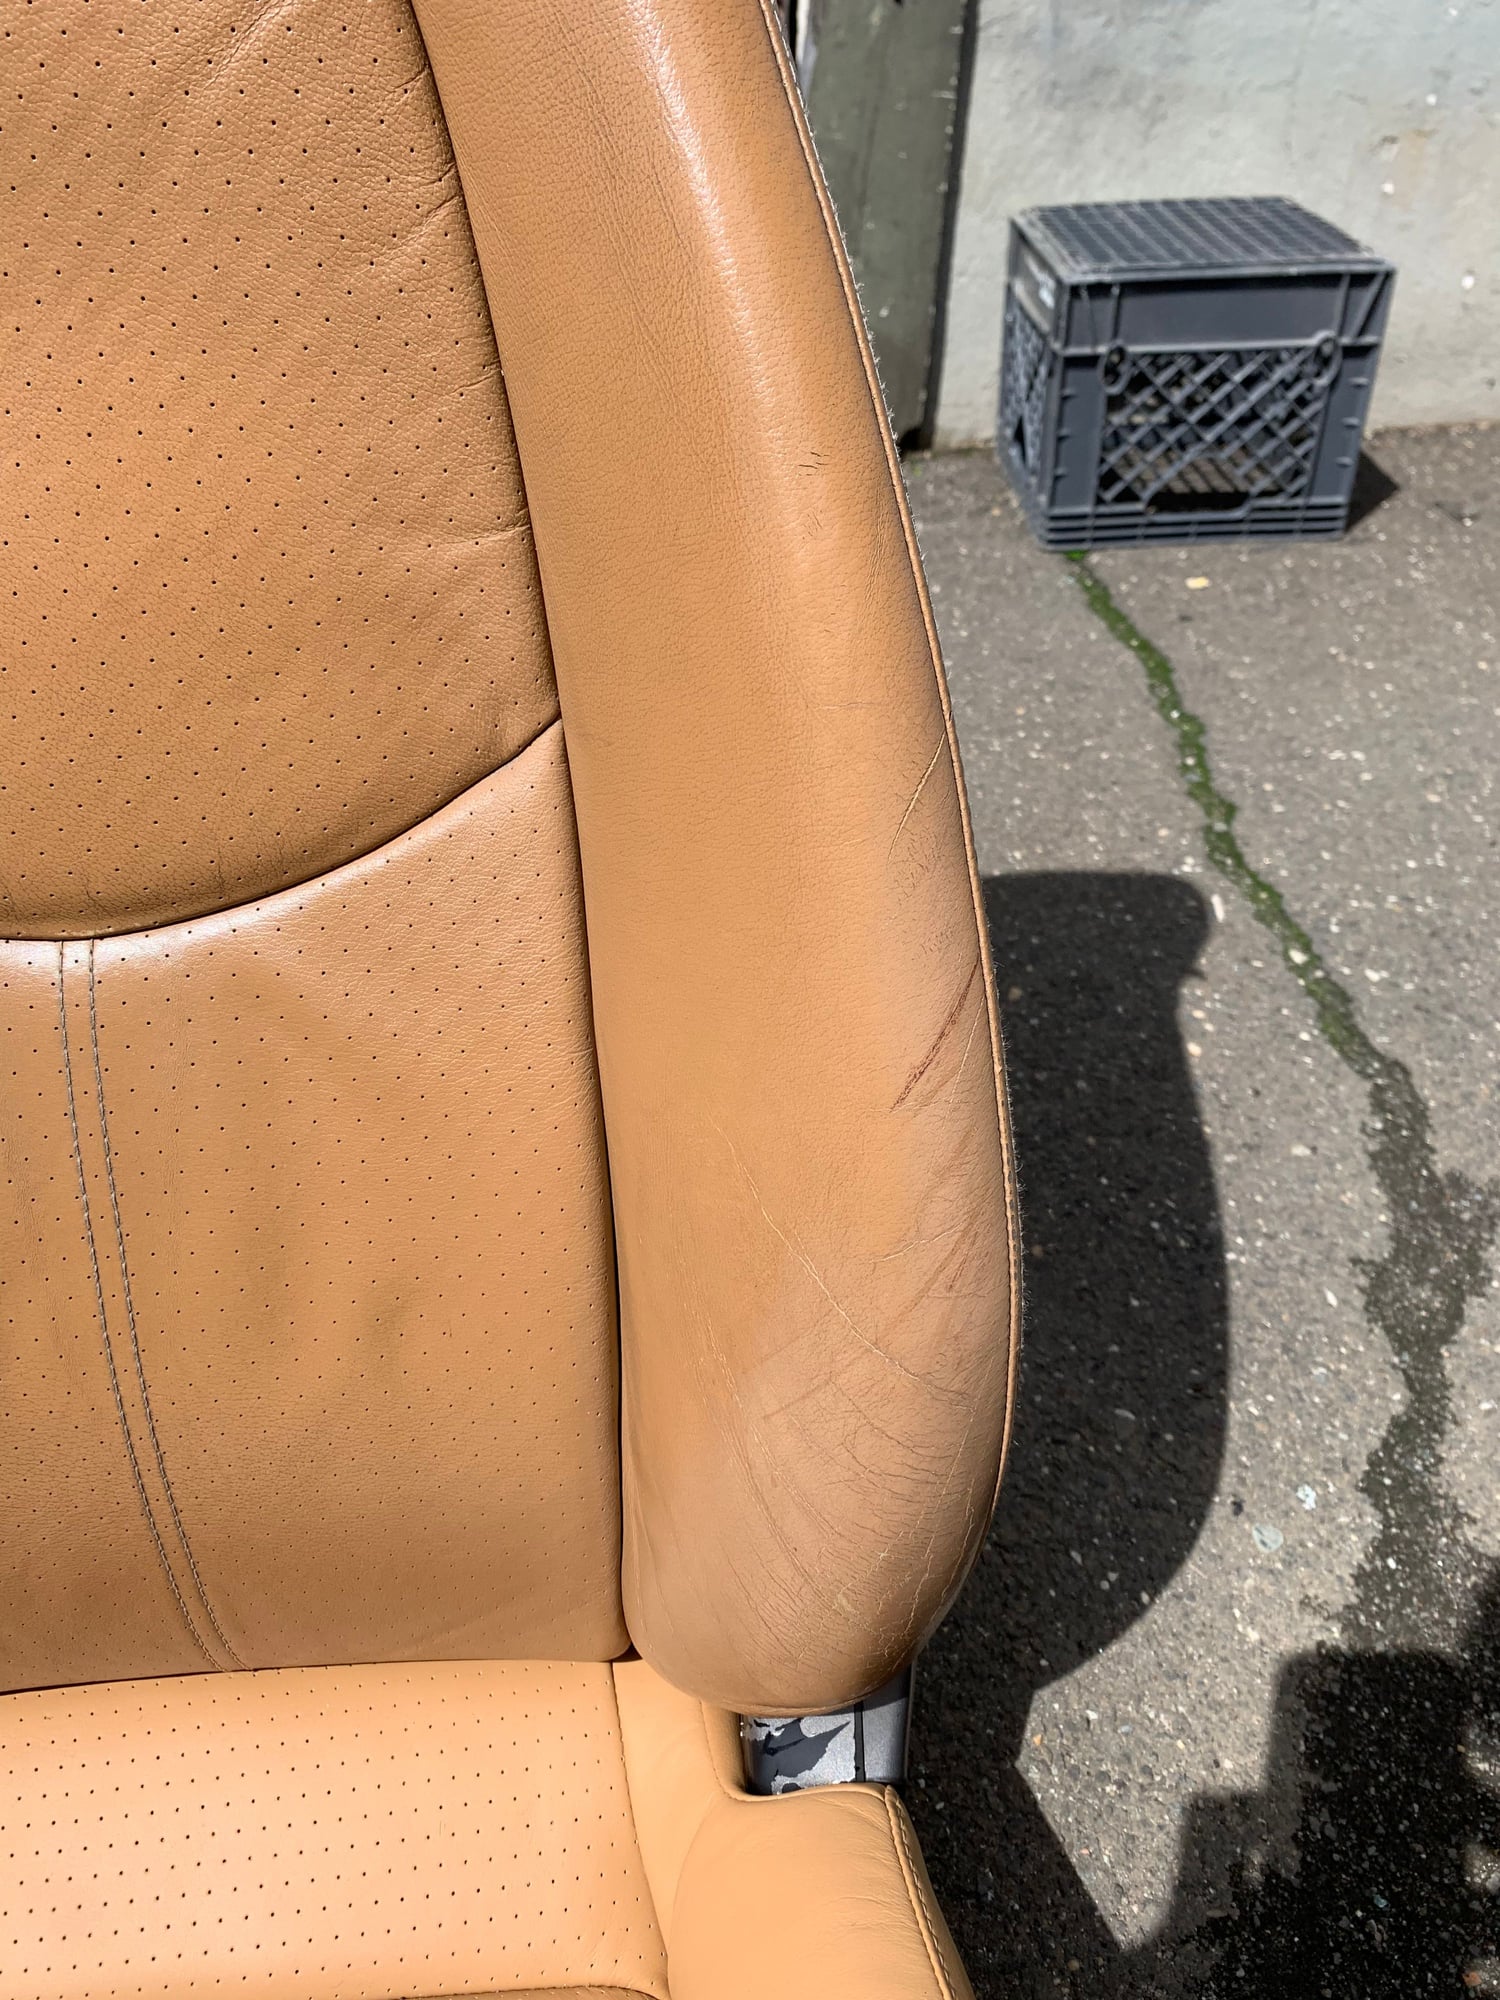 Interior/Upholstery - Porsche 997/987 Seats in Cashmere Beige (Tan) - fits 997, 911, 996, 993, 964, 911 - Used - Greenwich, CT 06807, United States